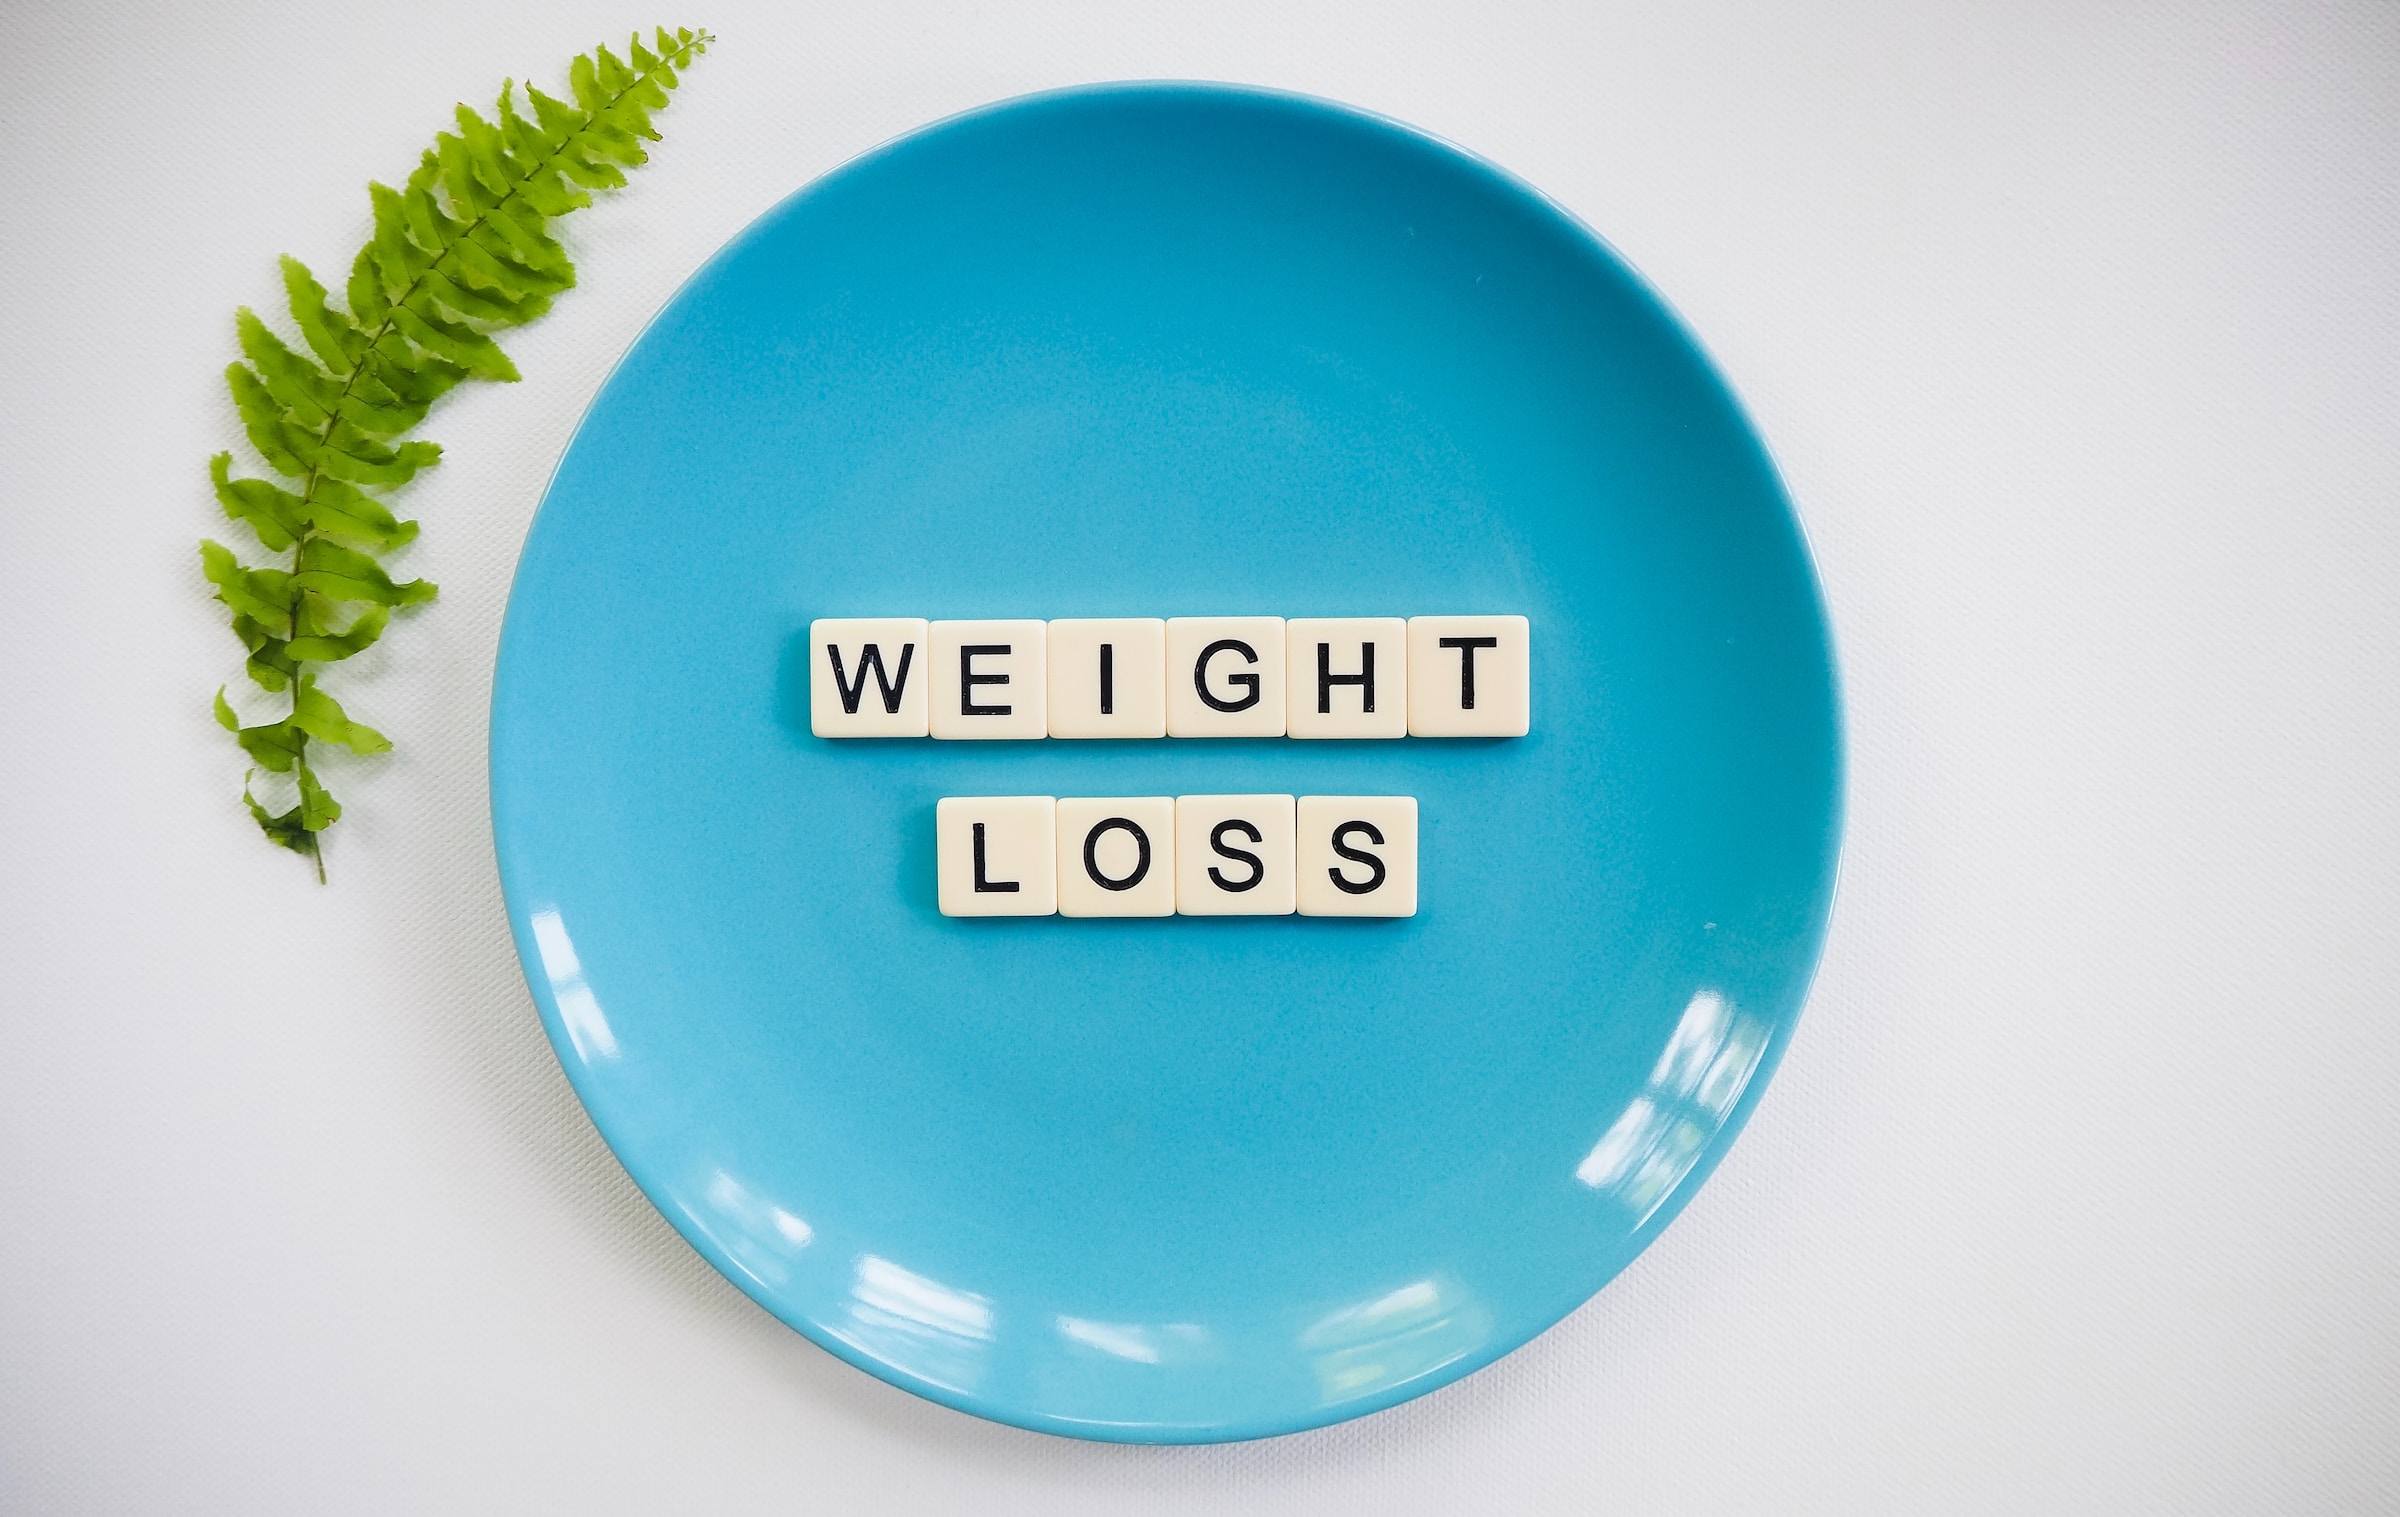 weight loss blocks text on blue plate on white background